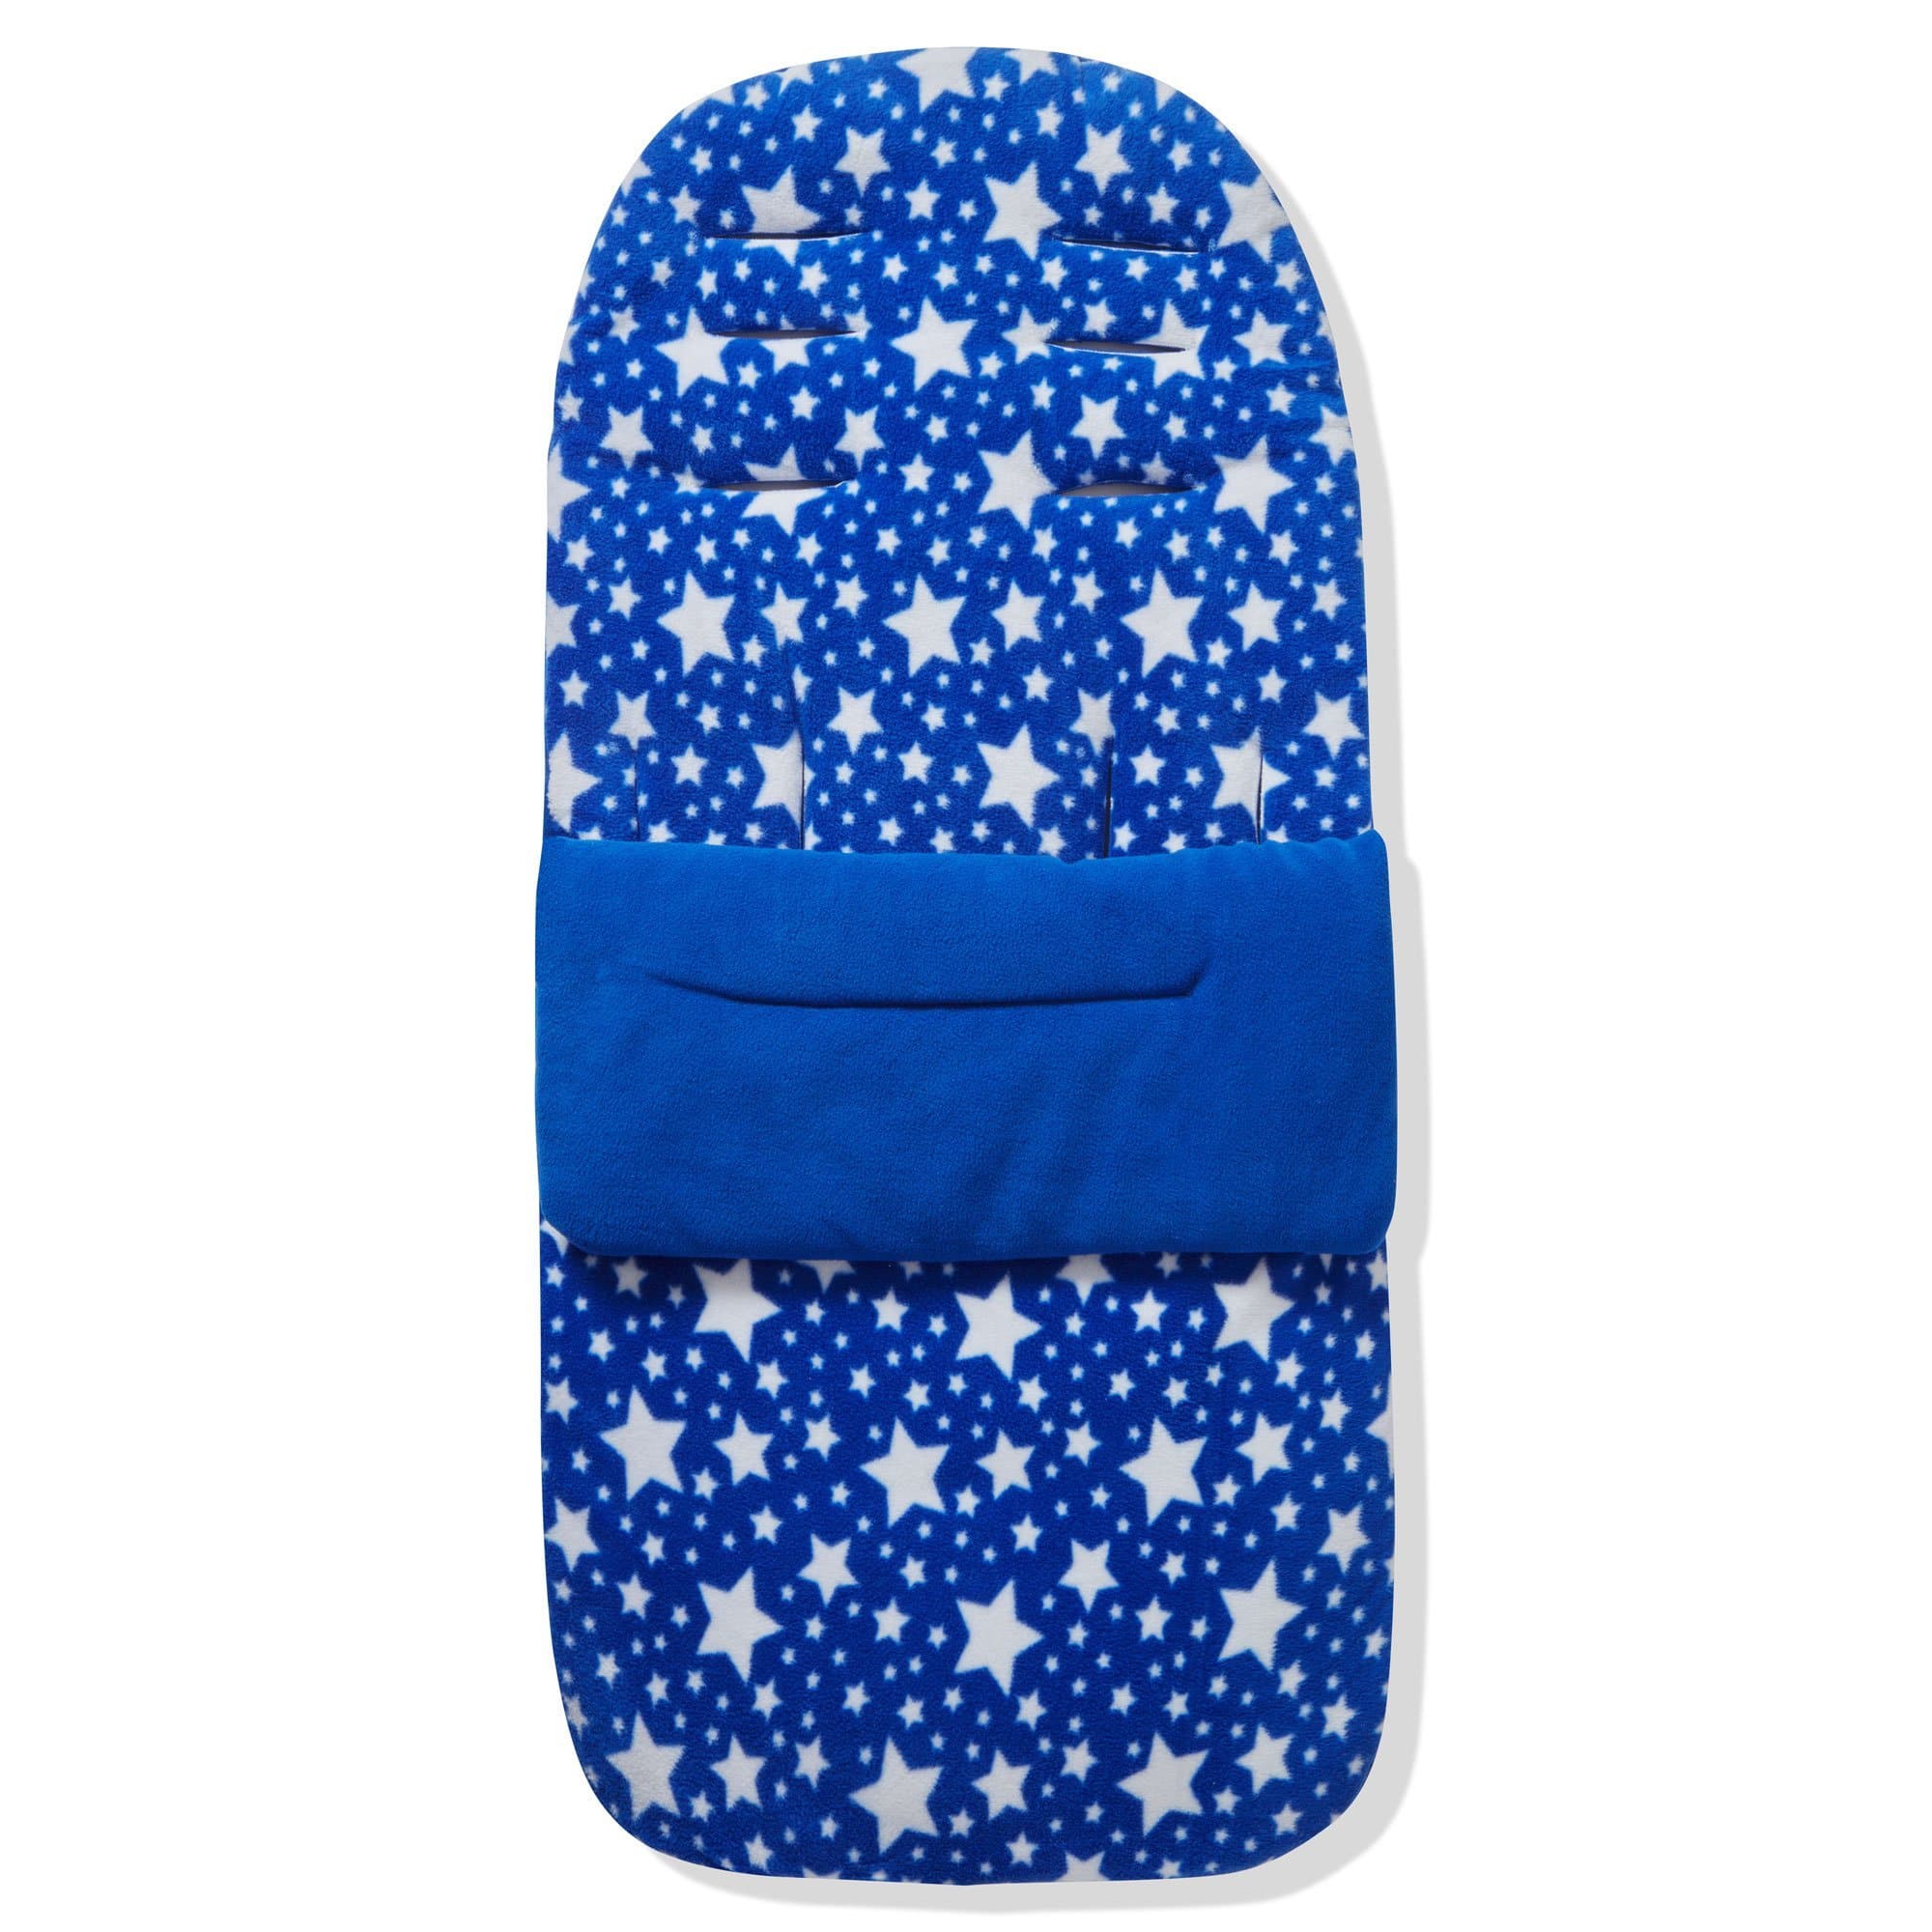 Fleece Footmuff / Cosy Toes Compatible with Baby Elegance - Blue Star / Fits All Models | For Your Little One